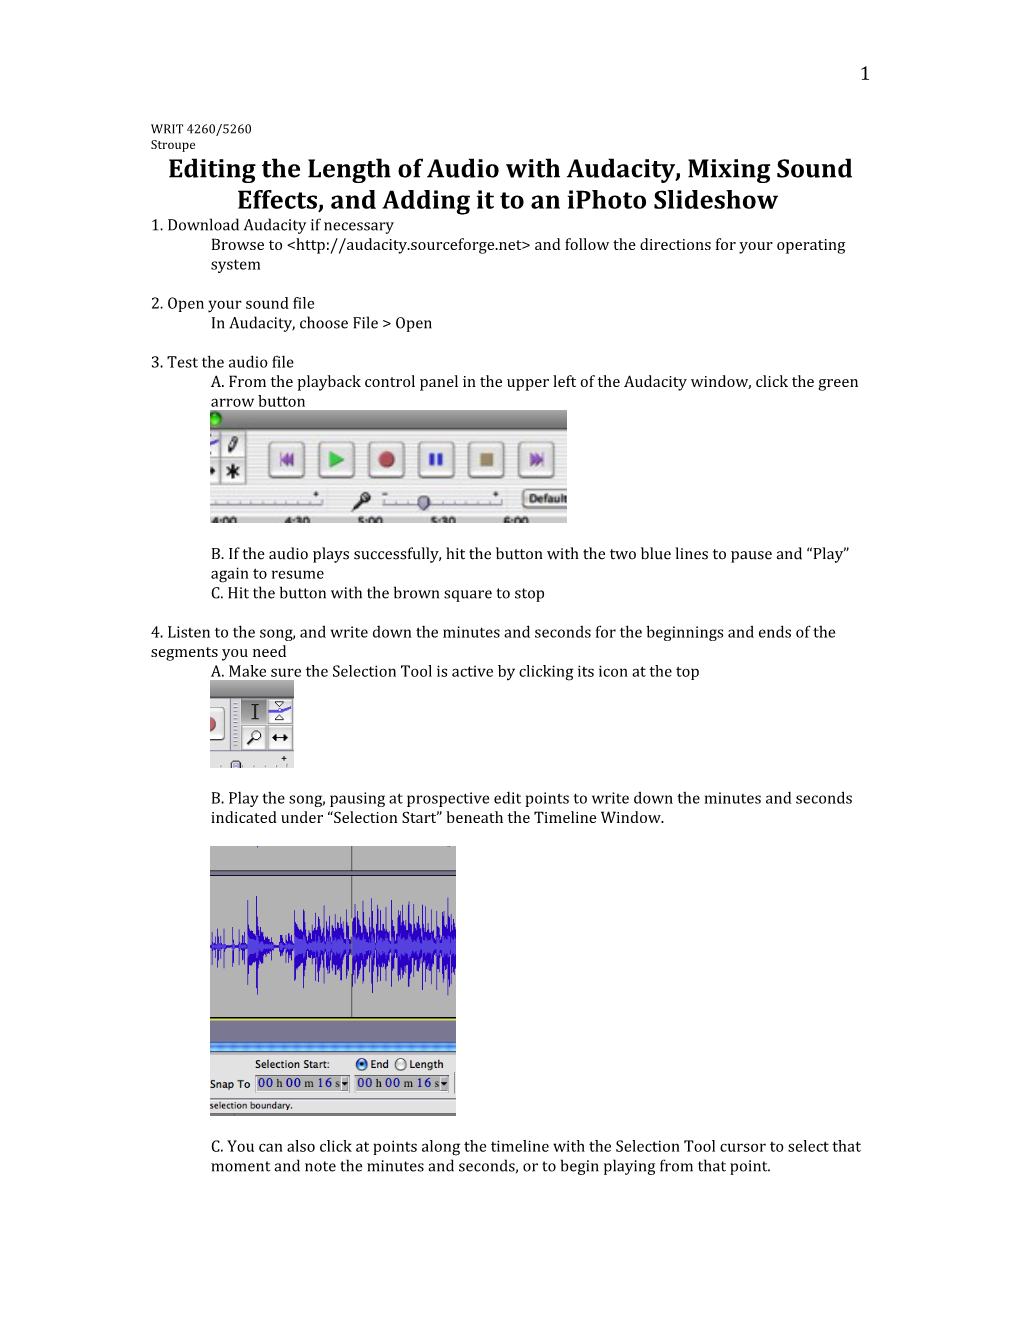 Editing the Length of Audio with Audacity, Mixing Sound Effects, and Adding It to an Iphoto